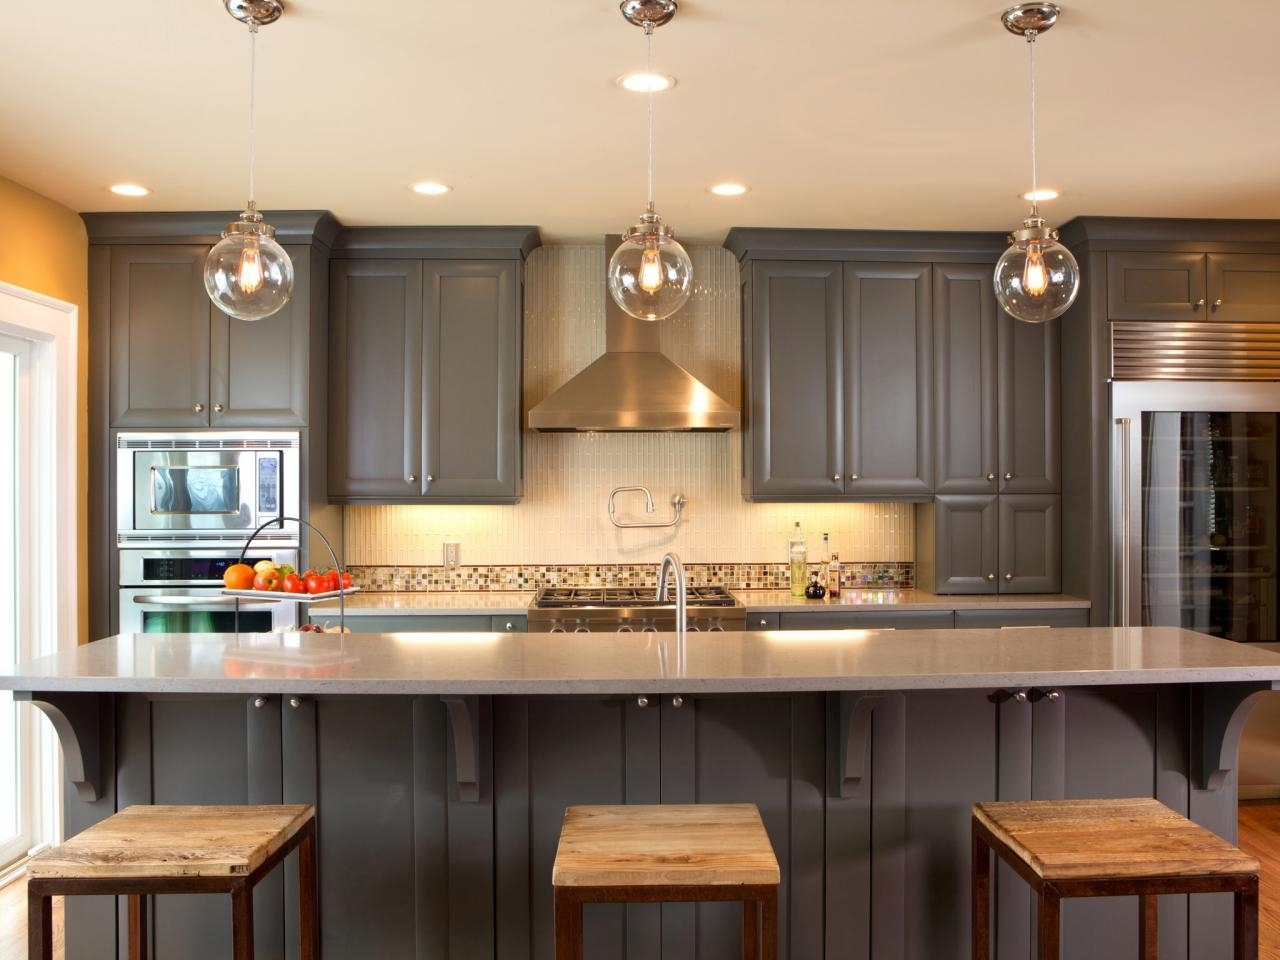 Ideas For Painting Kitchen Cabinets Pictures From Hgtv Hgtv 3 